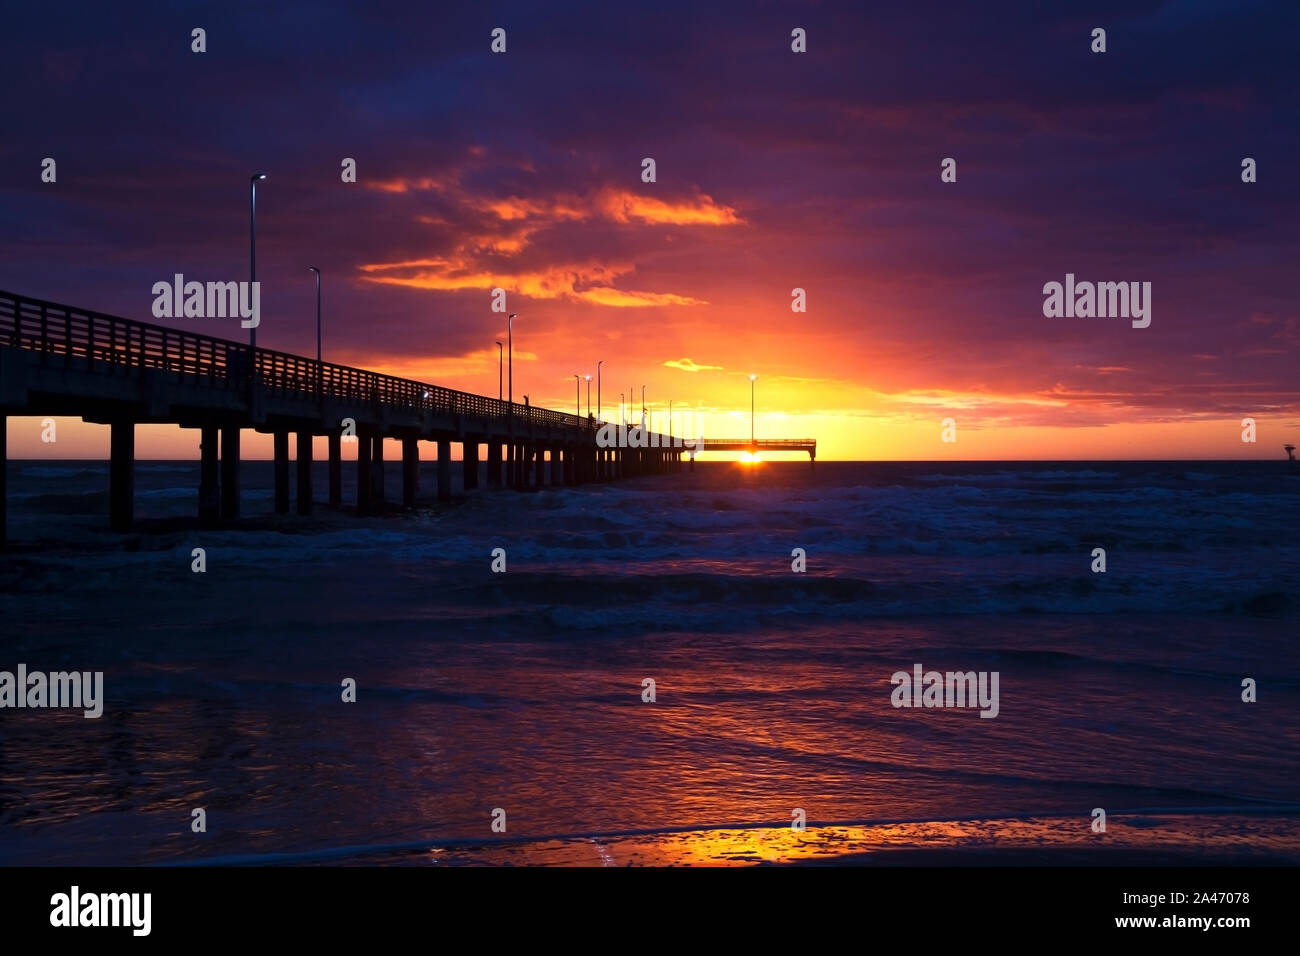 Sunrise at the Fishing Pier in Texas, Gulf of Mexico Stock Photo